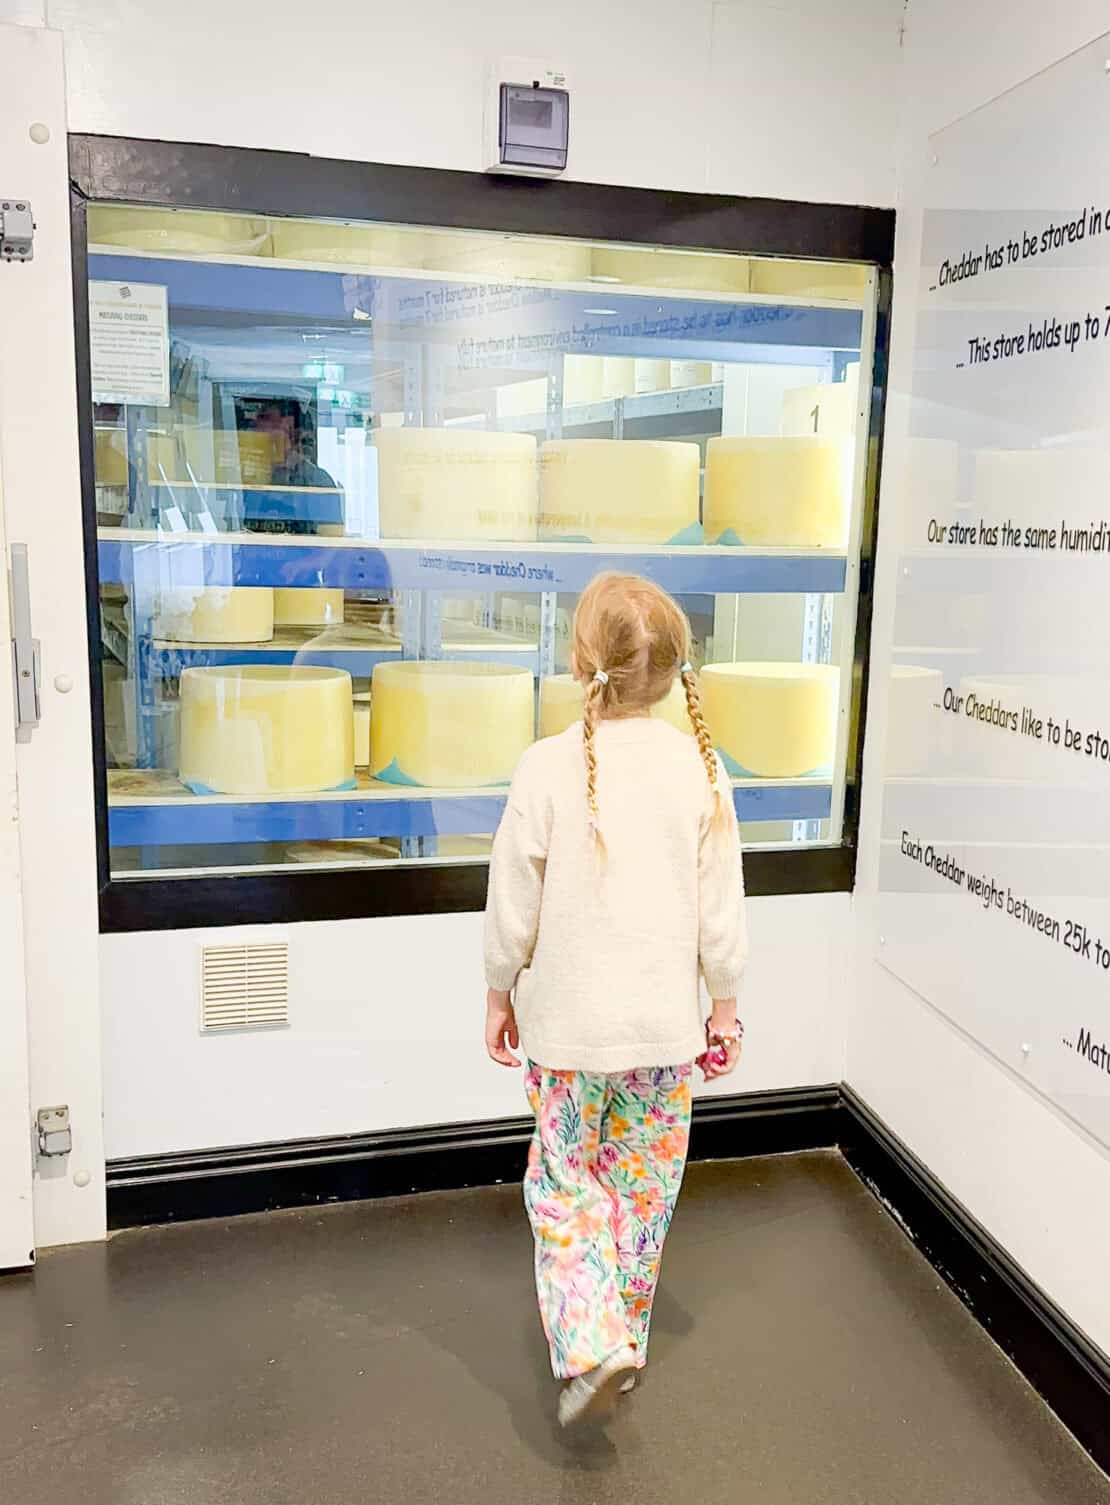 Child looking at cheddar cheese through the window